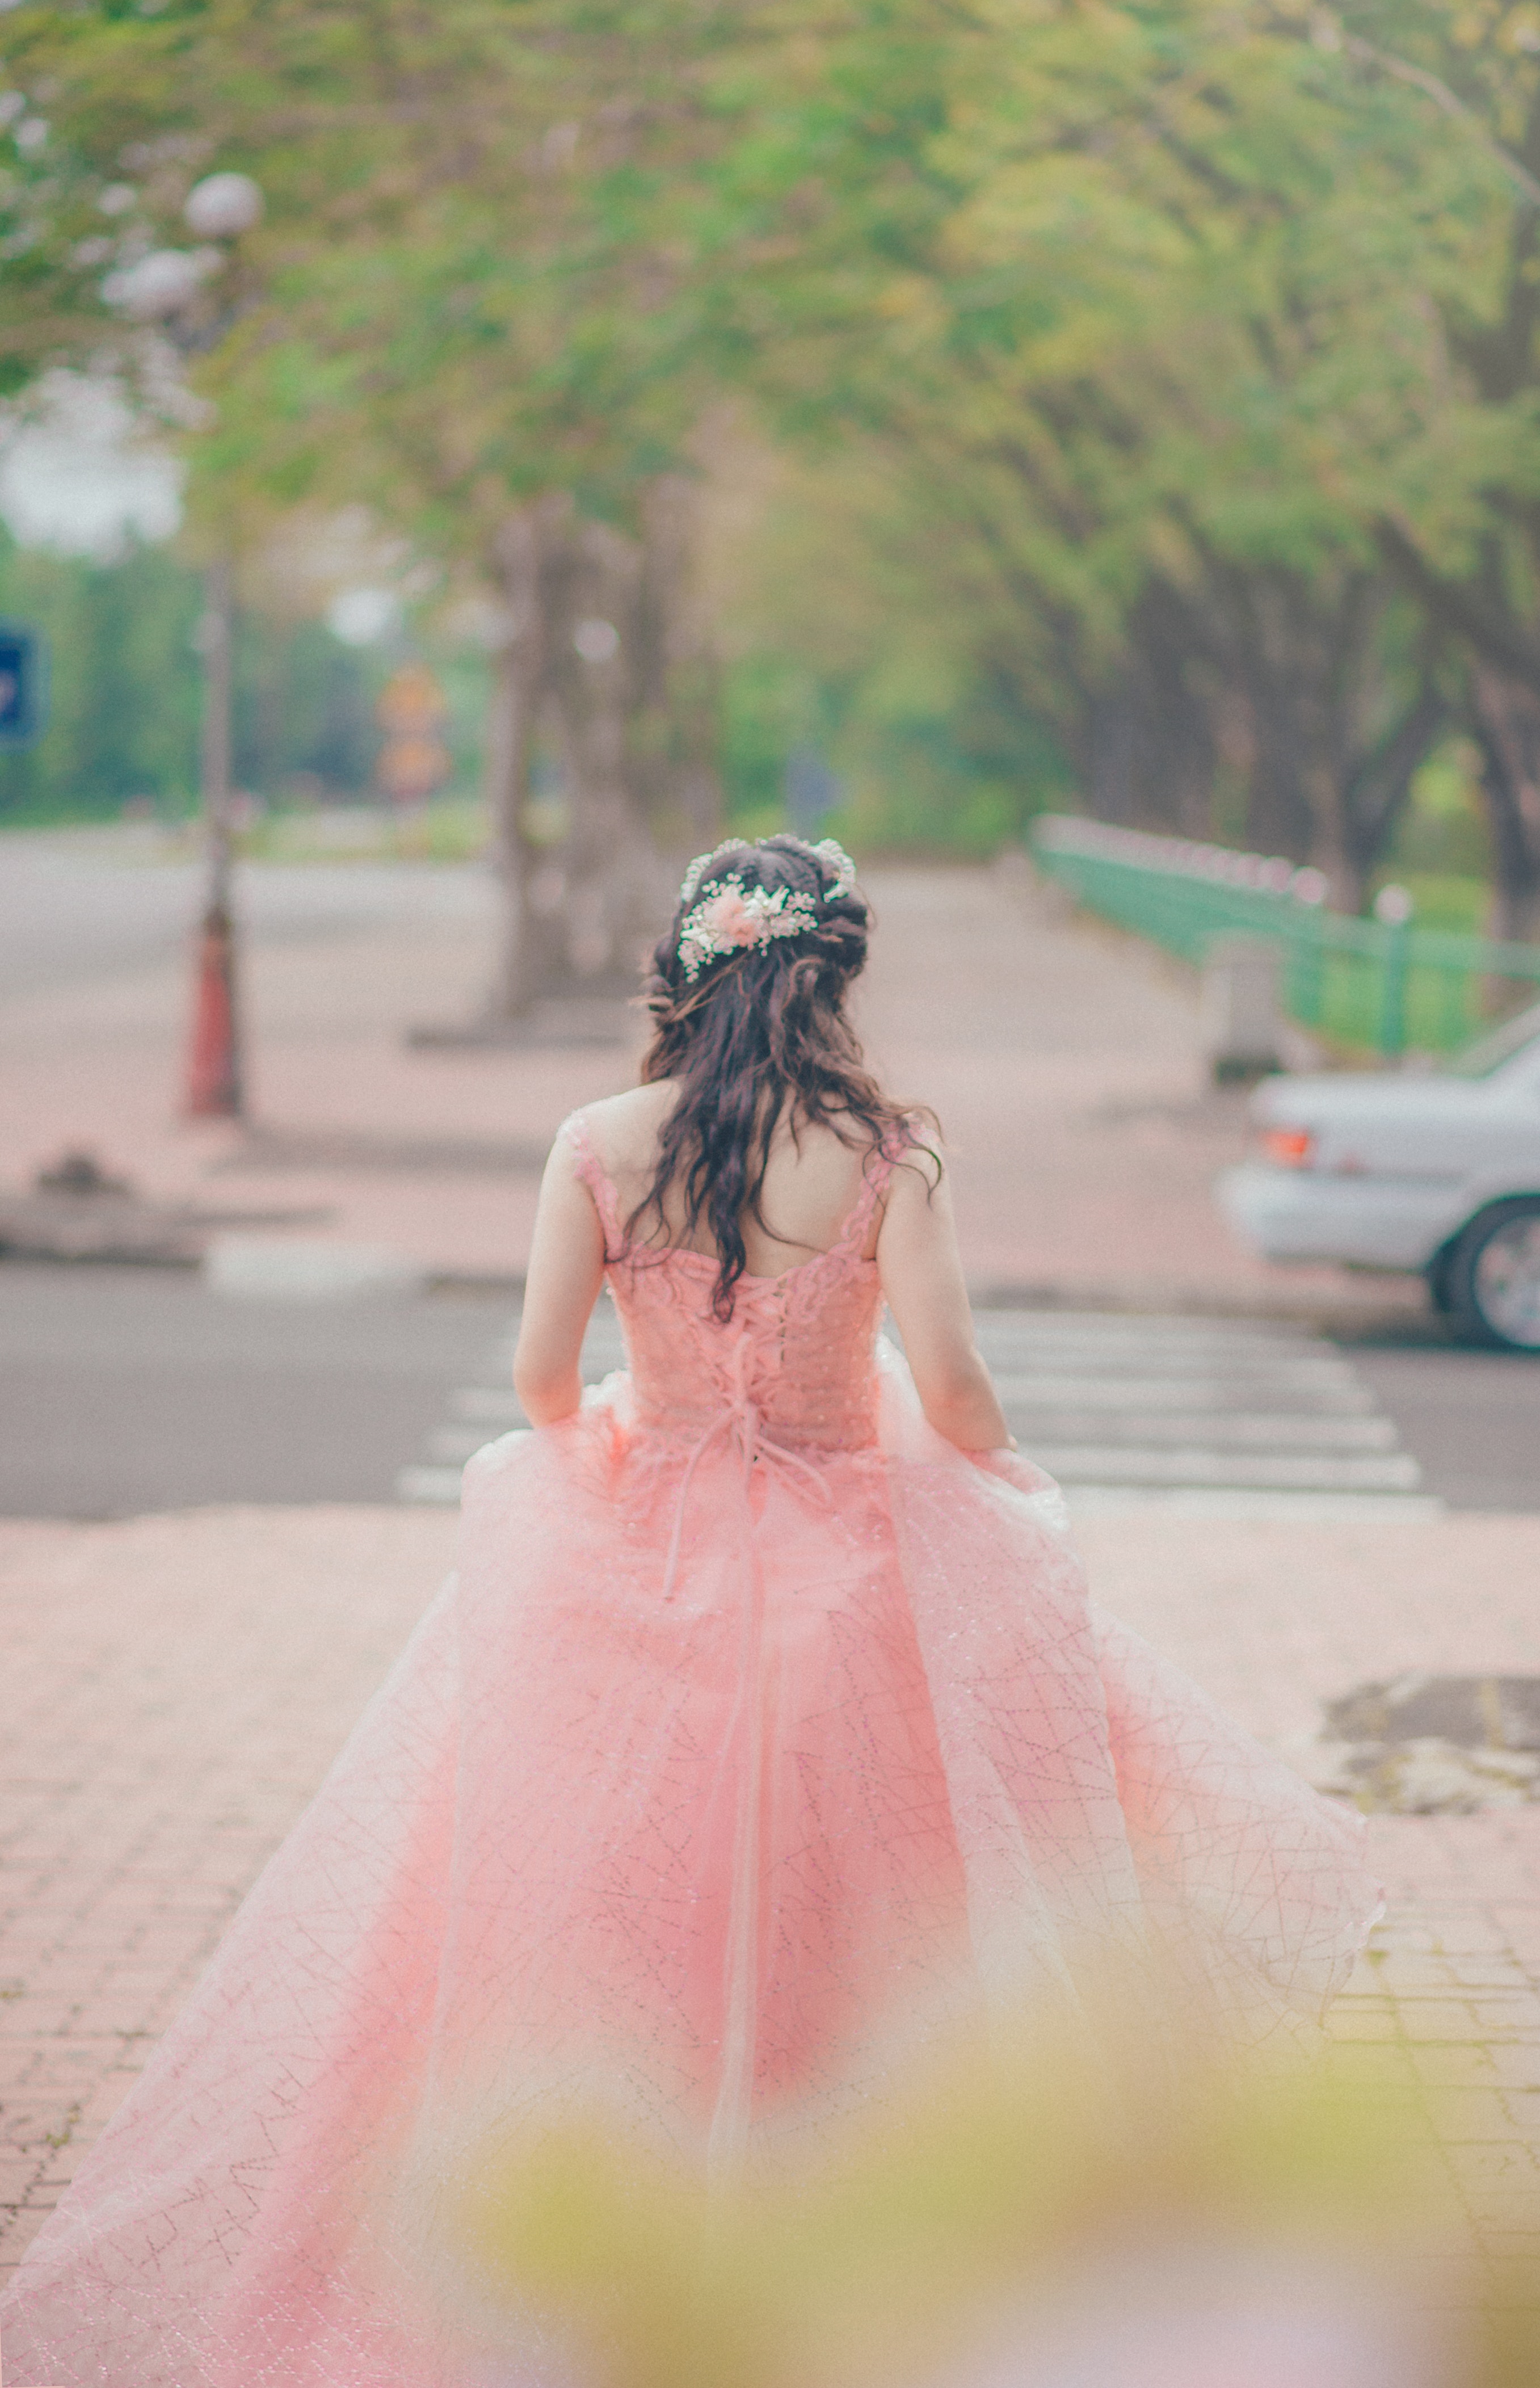 Woman wearing pink floral gown stands near green trees at daytime photo